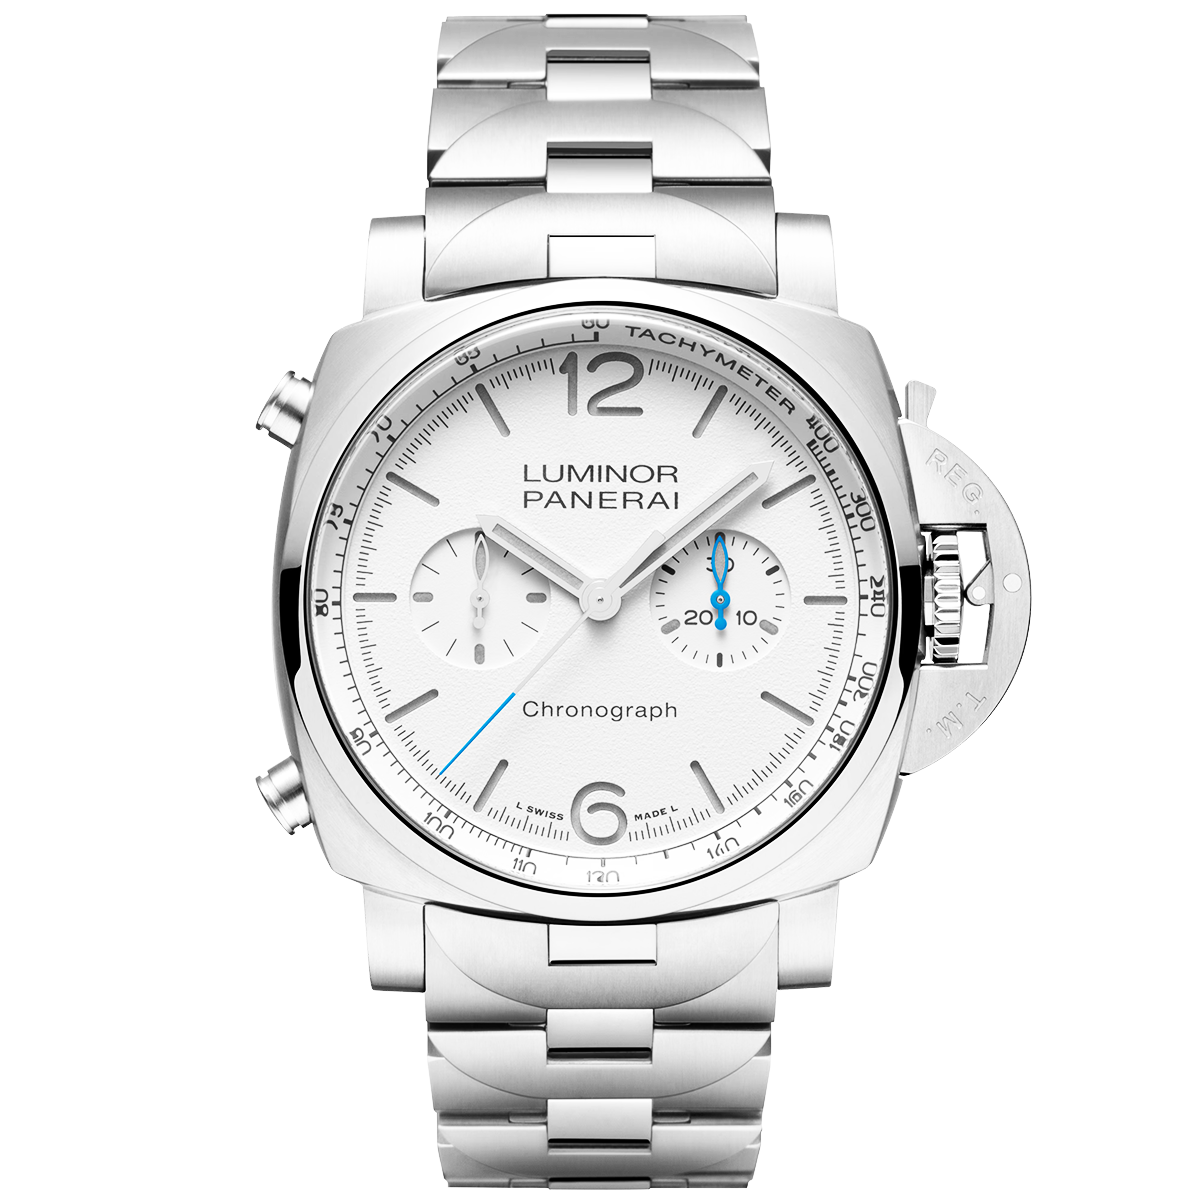 Luminor 44mm White Dial Automatic Chronograph Bracelet Watch